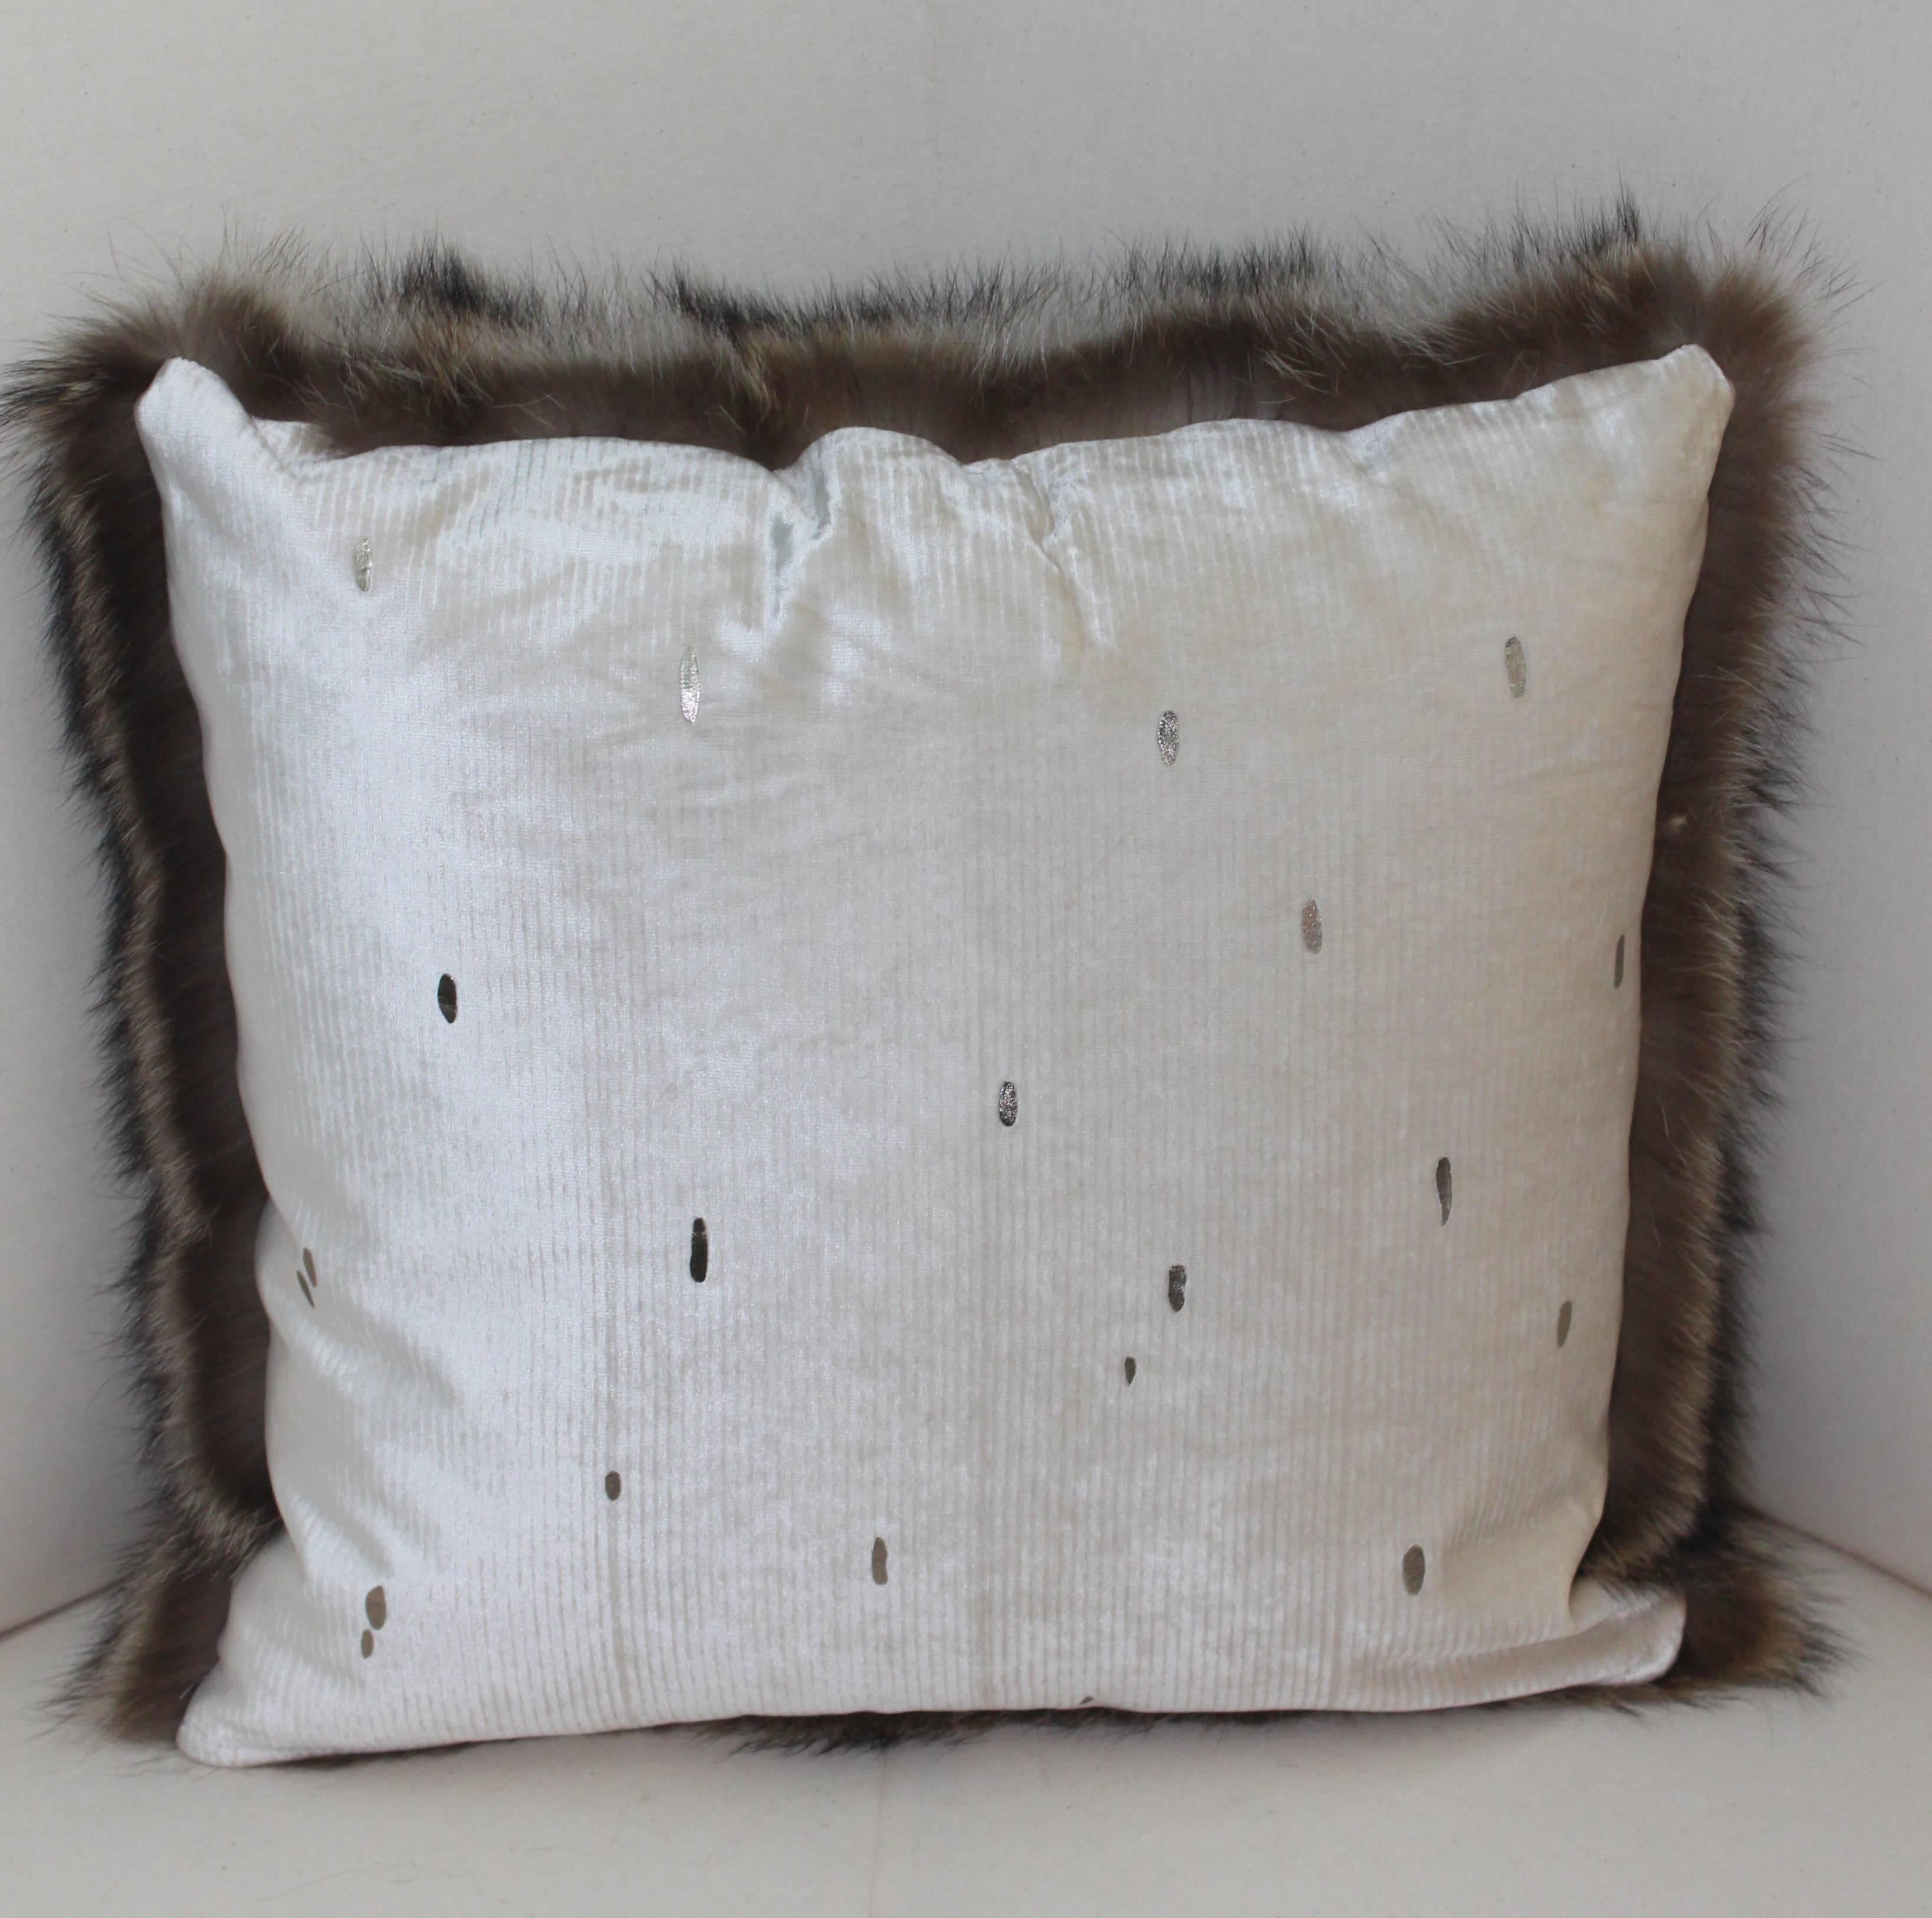 Luxurious down filled genuine Raccoon throw pillows. The furs have been fully refreshed are in great condition and filled with 50/50 down/down feathers. Six of the backs are finished in a custom silk velvet dotted with bronze accents.  Five are